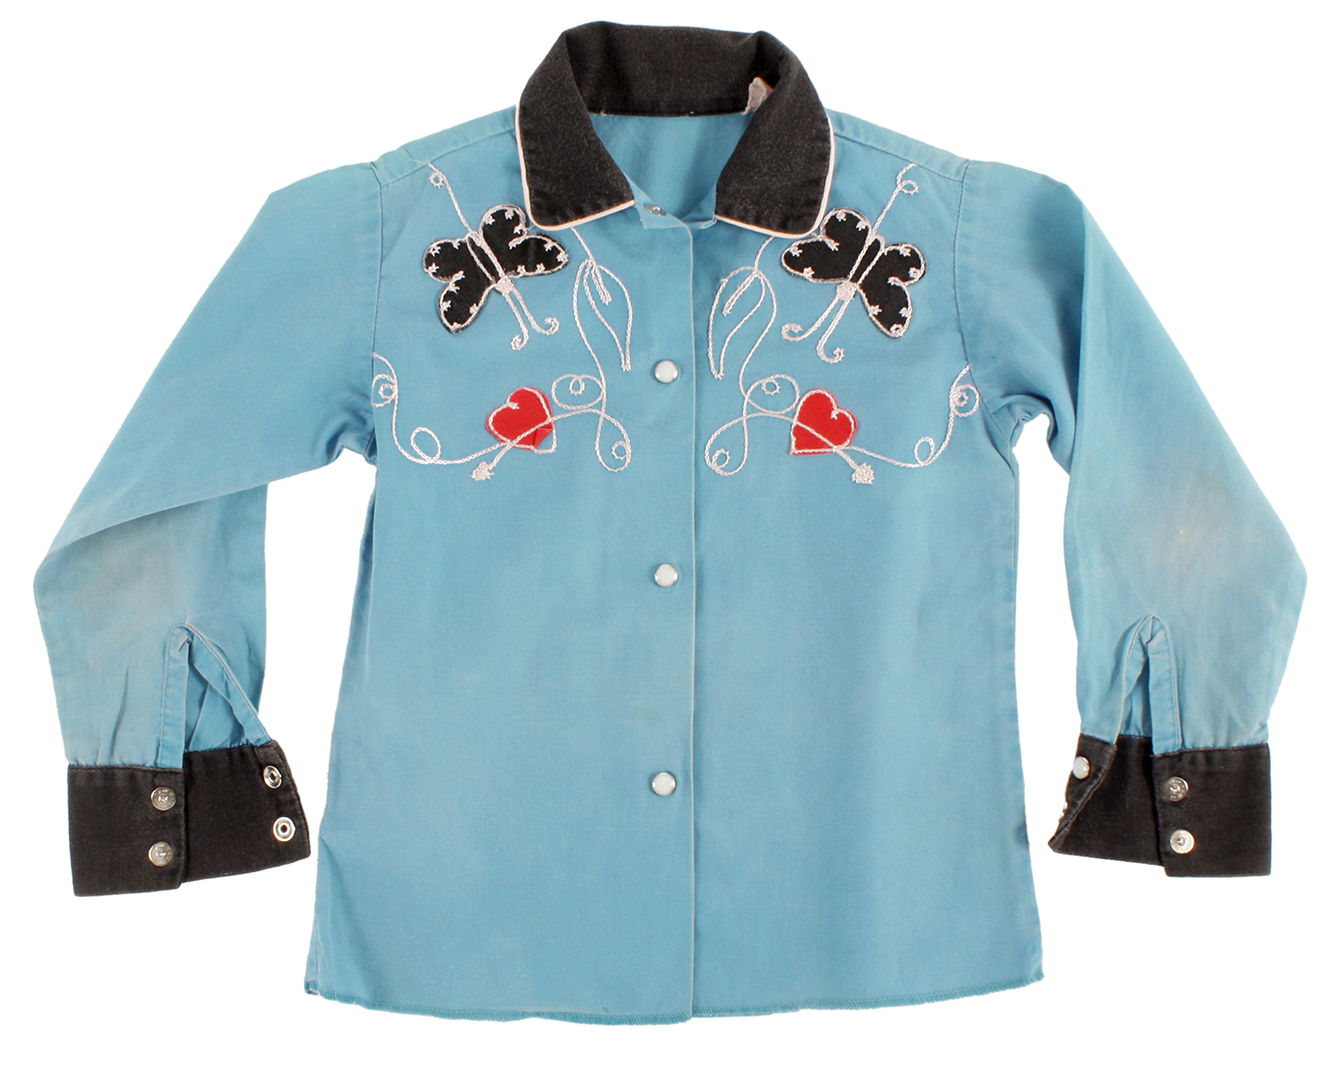 Kids Western shirt with embroidery